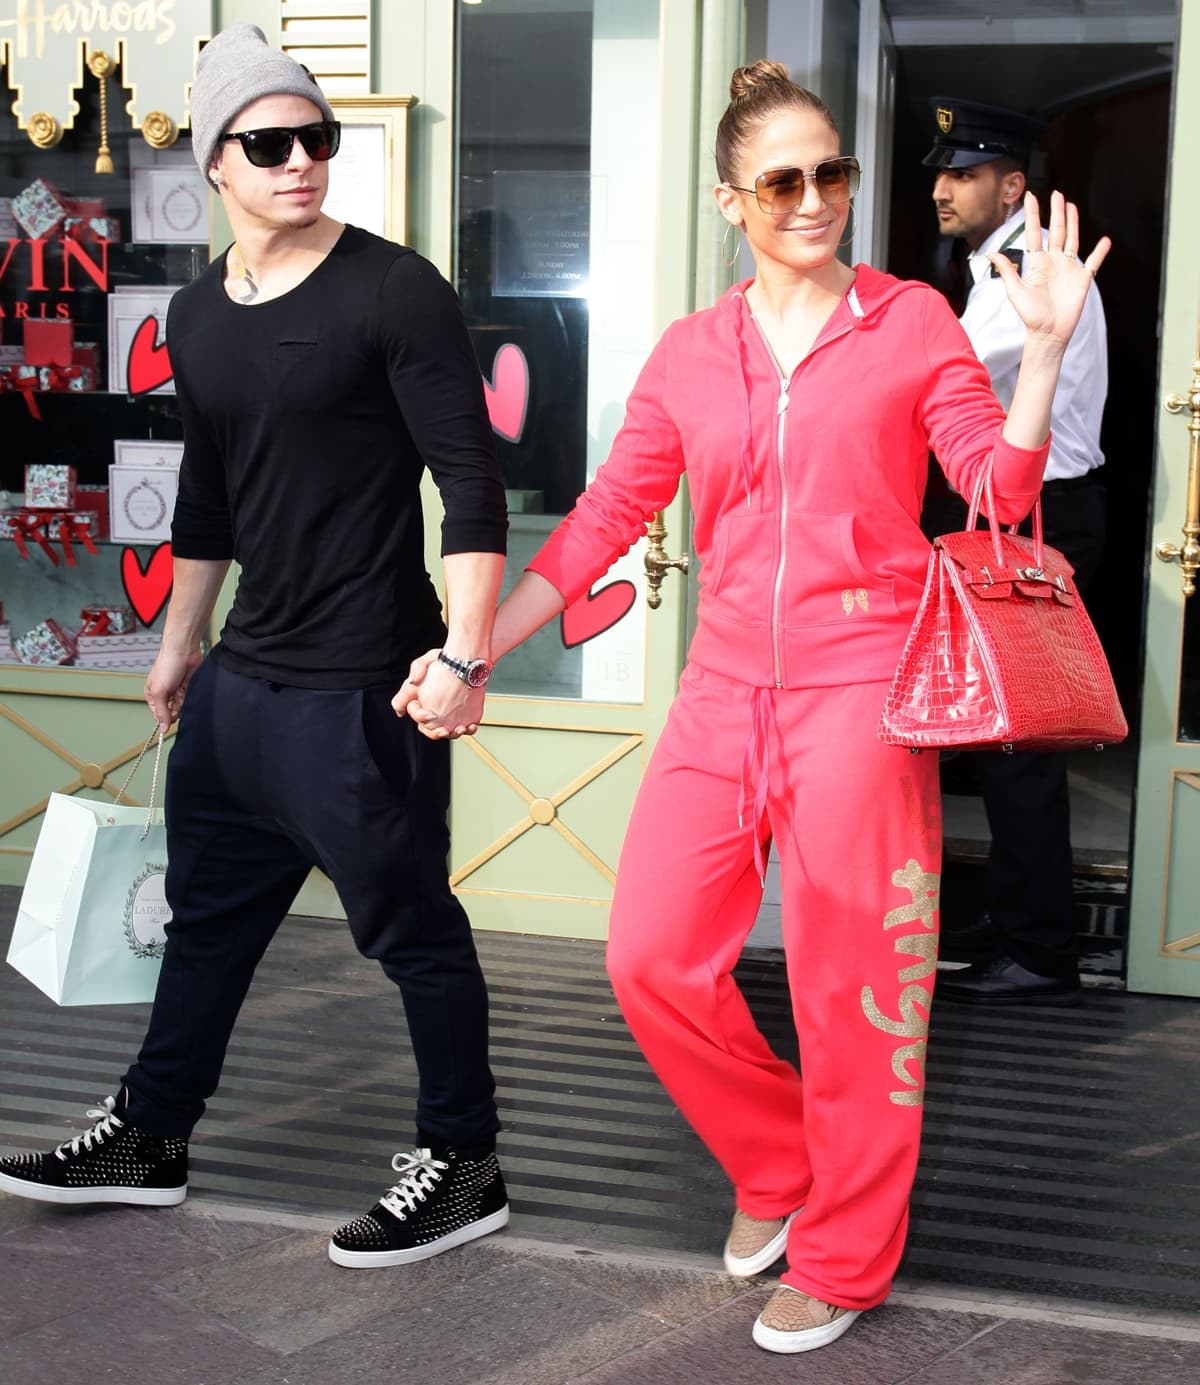 On October 24, 2012, Jennifer Lopez, accompanied by Casper Smart, was spotted leaving London's Harrods department store, stylishly accessorizing her ensemble with a red croc Hermes Birkin